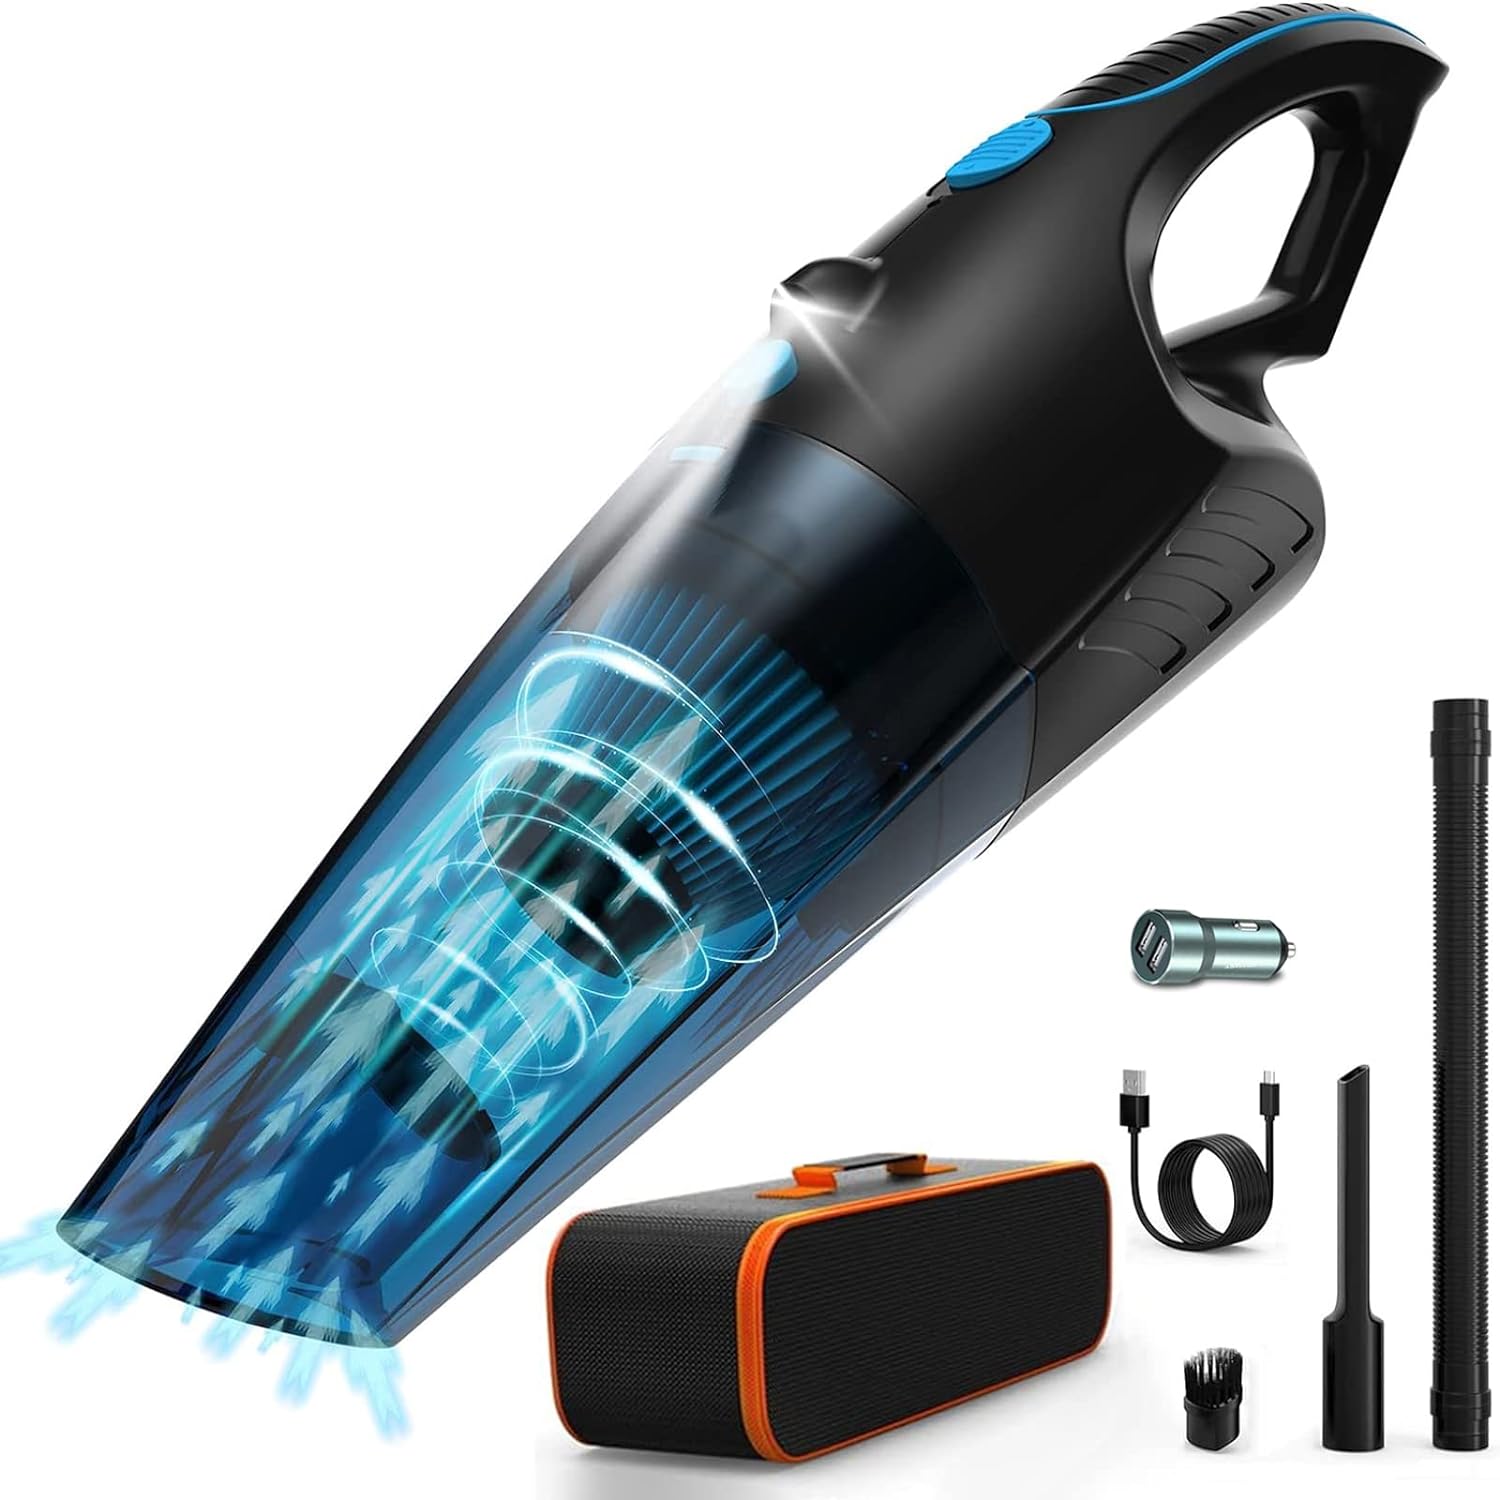 Neymeo XTGV02A Handheld Cordless Vacuum, 14000PA Powerful Suction, Handheld Vacuum Cleaner for Car, Home & Office, Pet Hair & Cat Litter Cleaning, 2 Speed with LED Lights, Type-C Fast Charging - Black